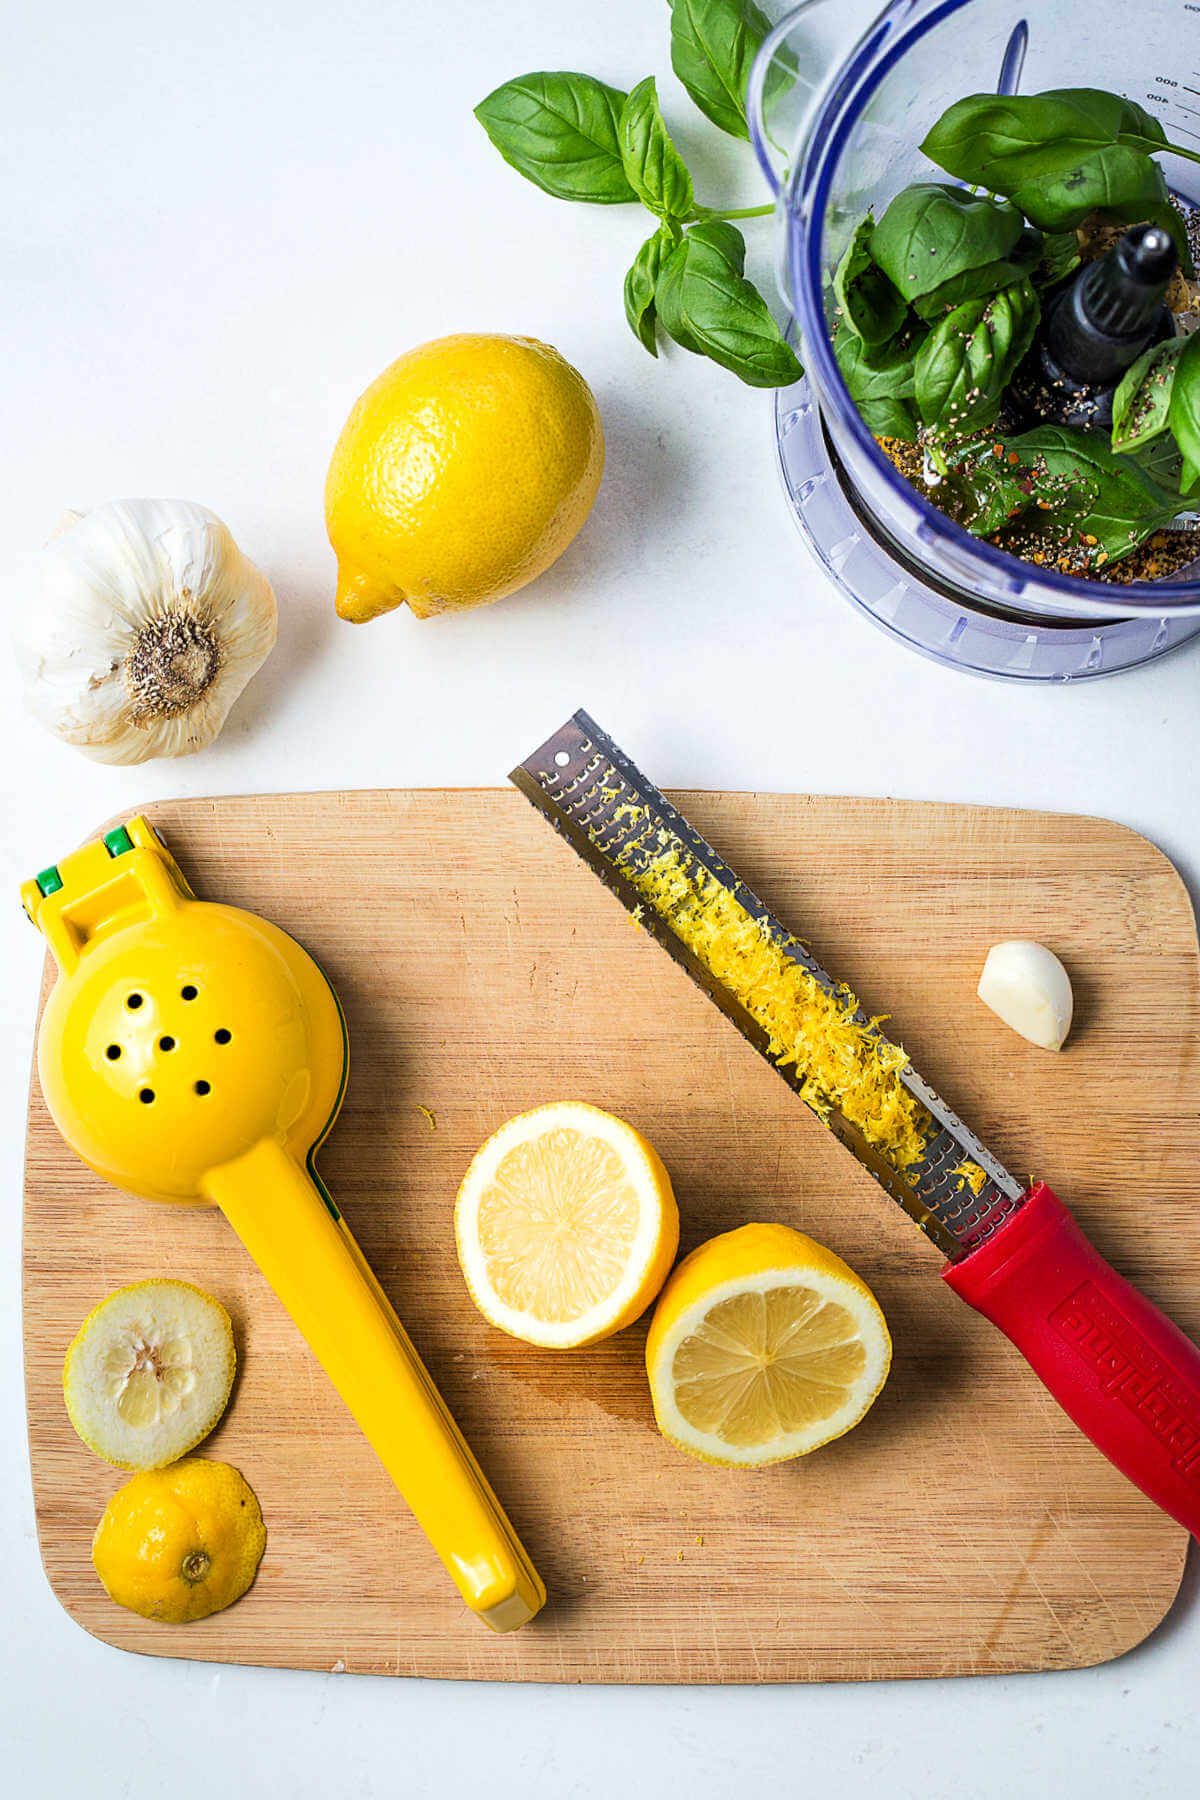 A halved lemon, a zester, and a citrus press on a cutting board on a table.